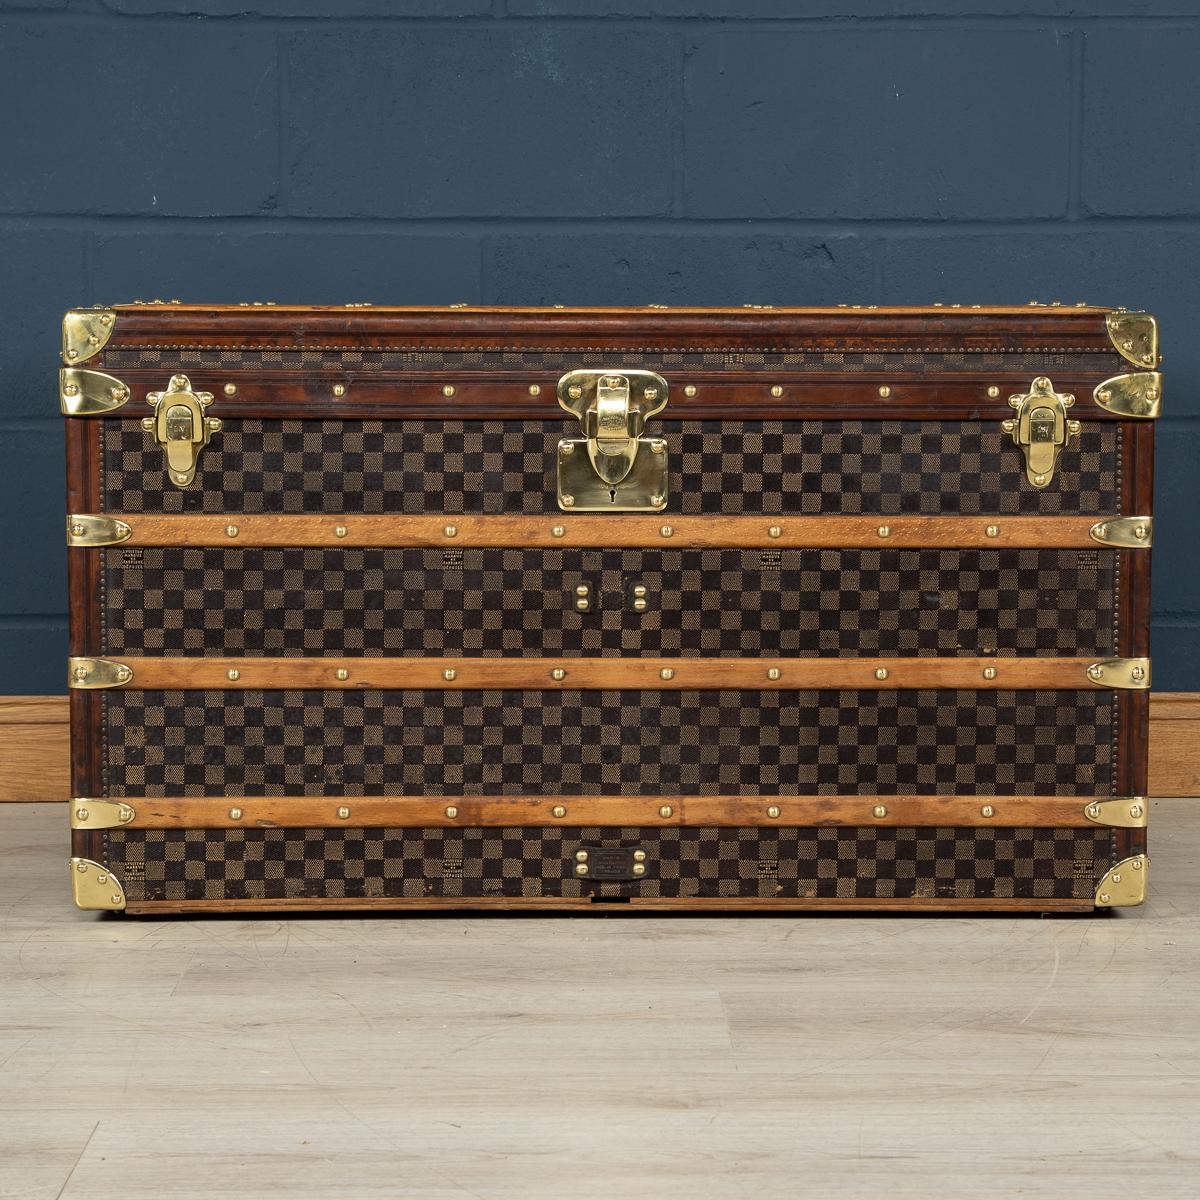 One of the rarest Louis Vuitton trunks to be offered, this trunk is covered in the world famous damier (checkerboard) canvas. Dating to circa 1900, it is a perfect example of such trunks. With its leather trim, brass studs, fittings and locks it